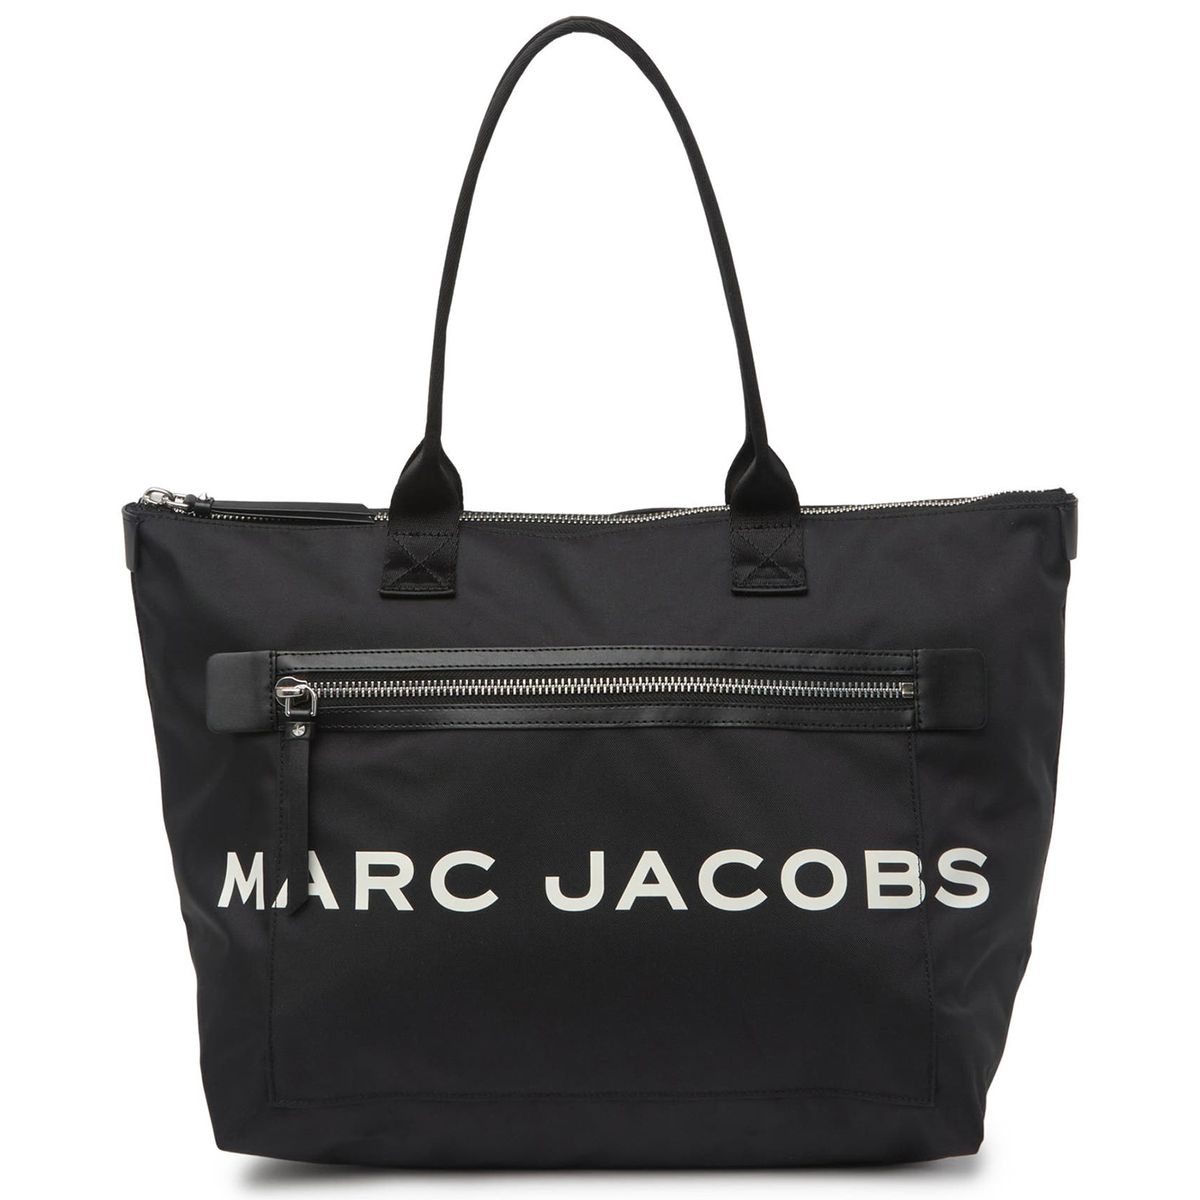 Marc Jacobs bags on sale